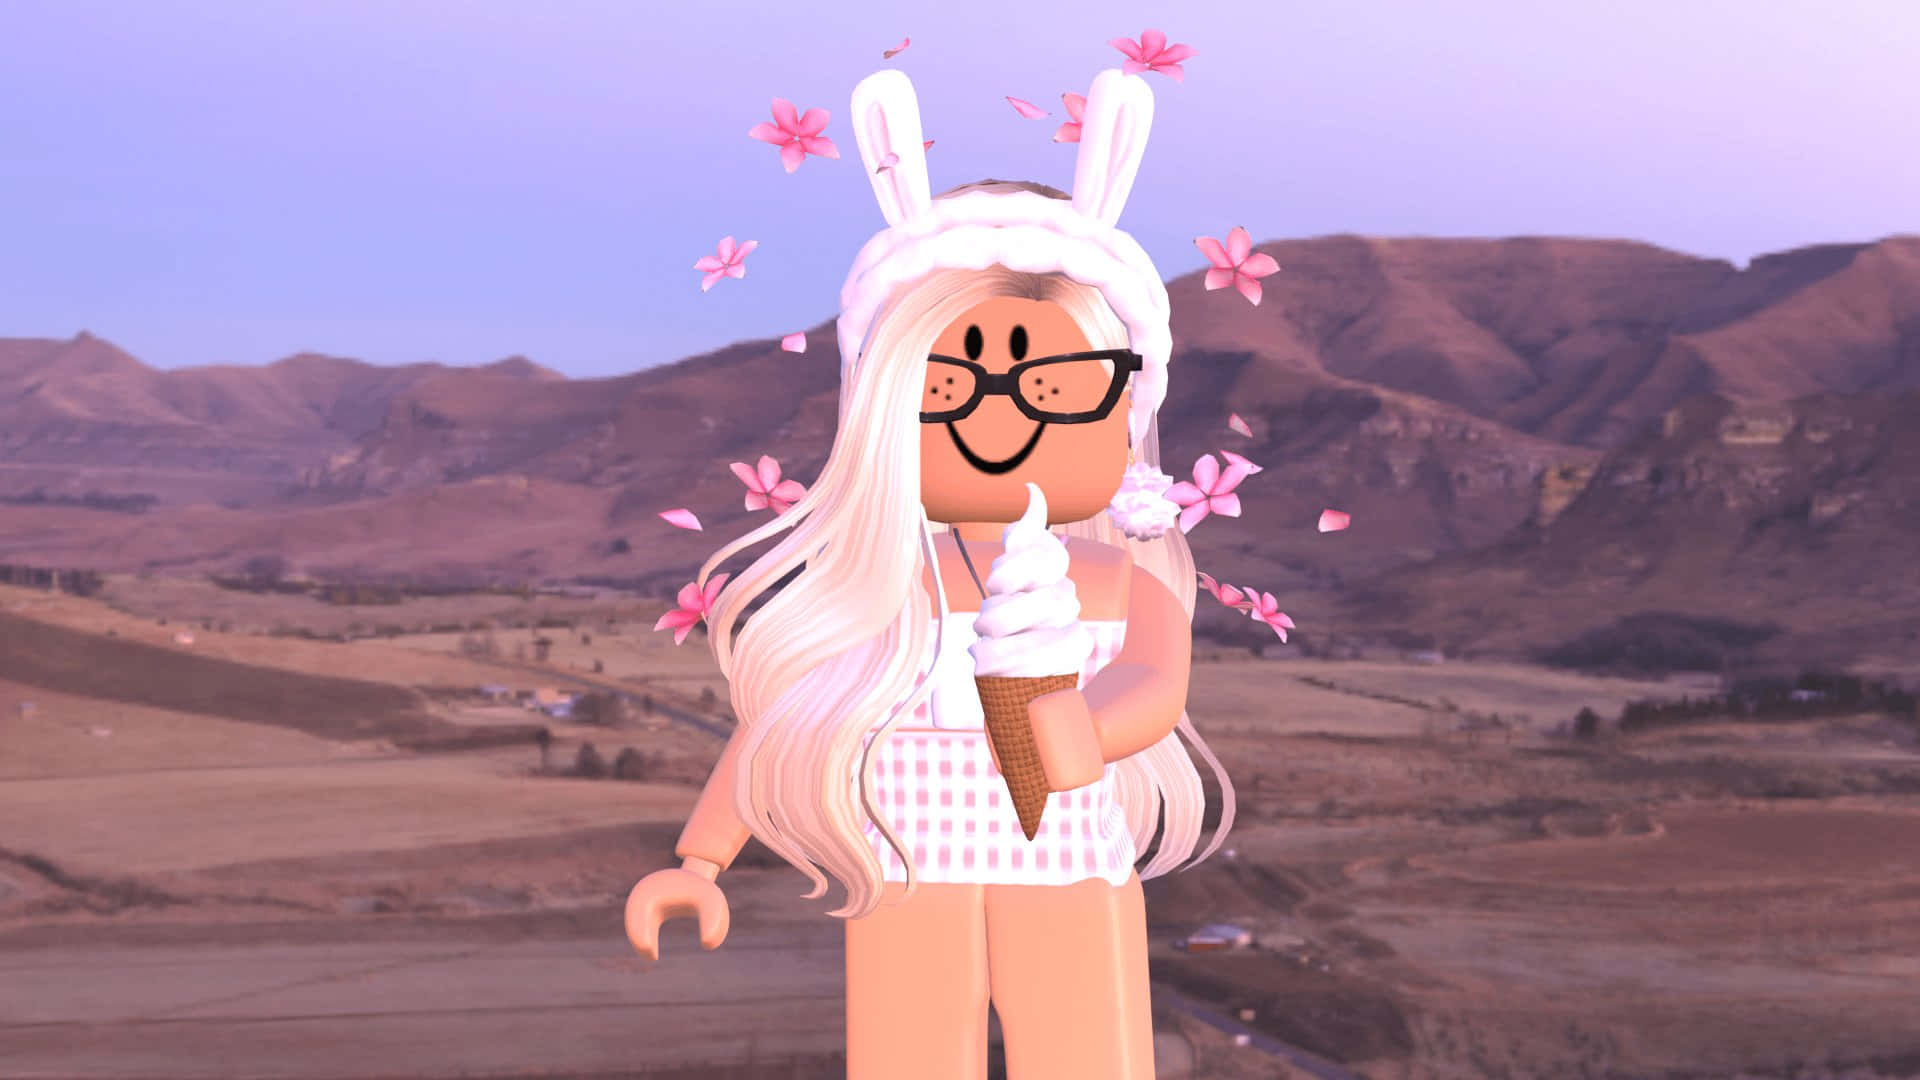 "Customize Your Roblox Avatar With Thousands of Aesthetic Combinations!"